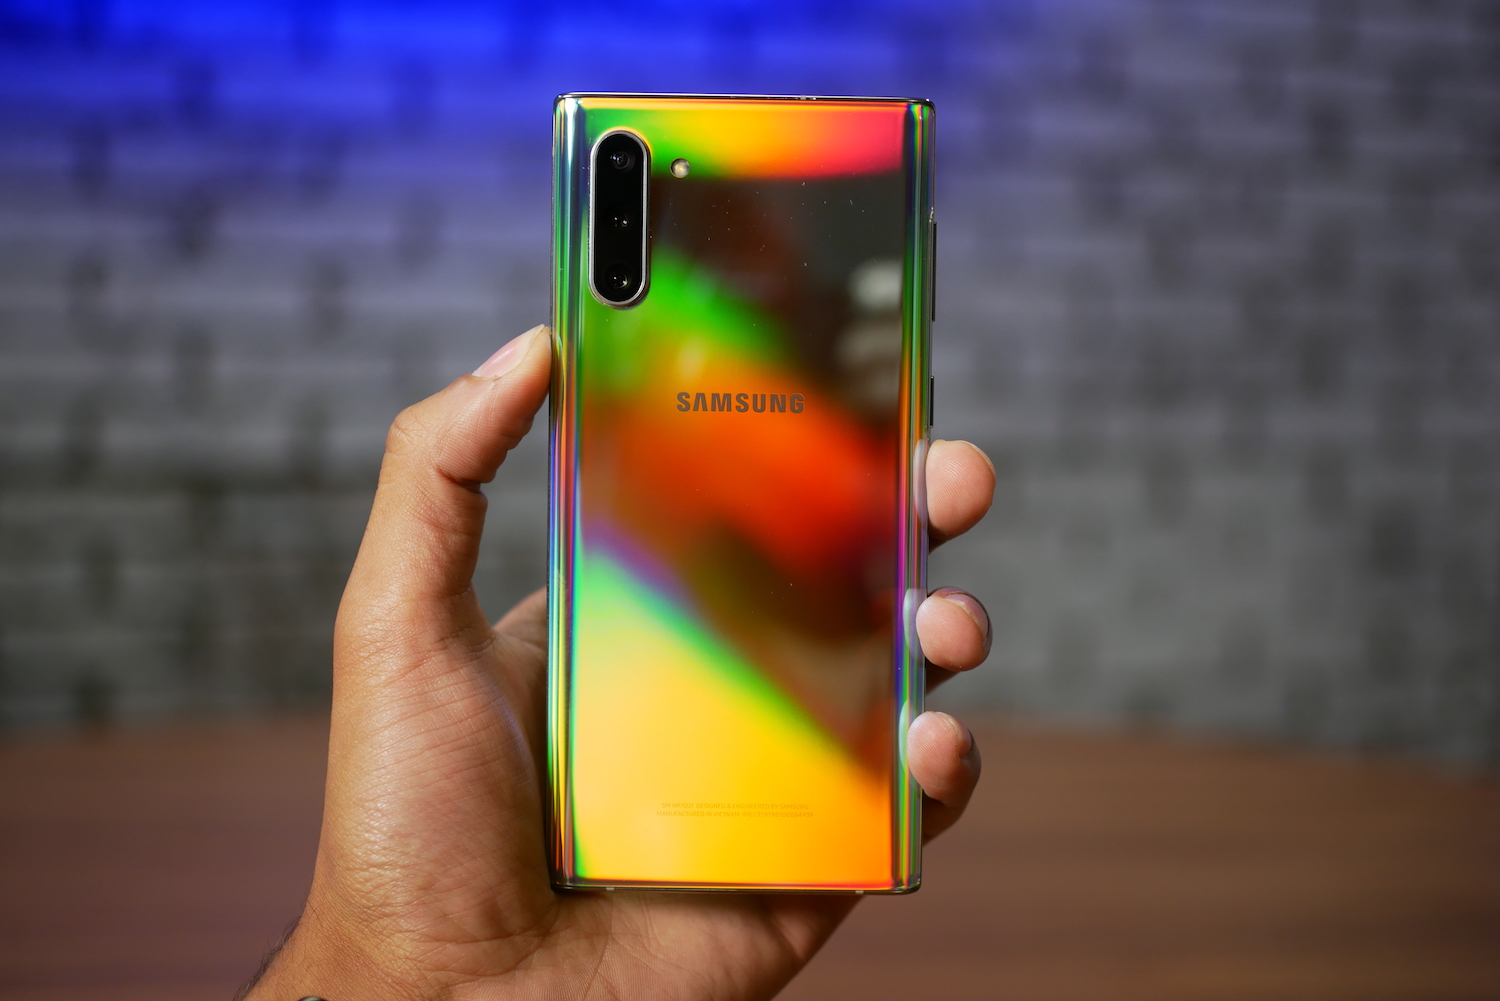 Samsung Galaxy Note 10+ Samsung Galaxy Note 10 Review: The Note For Everyone Else | Digital Trends